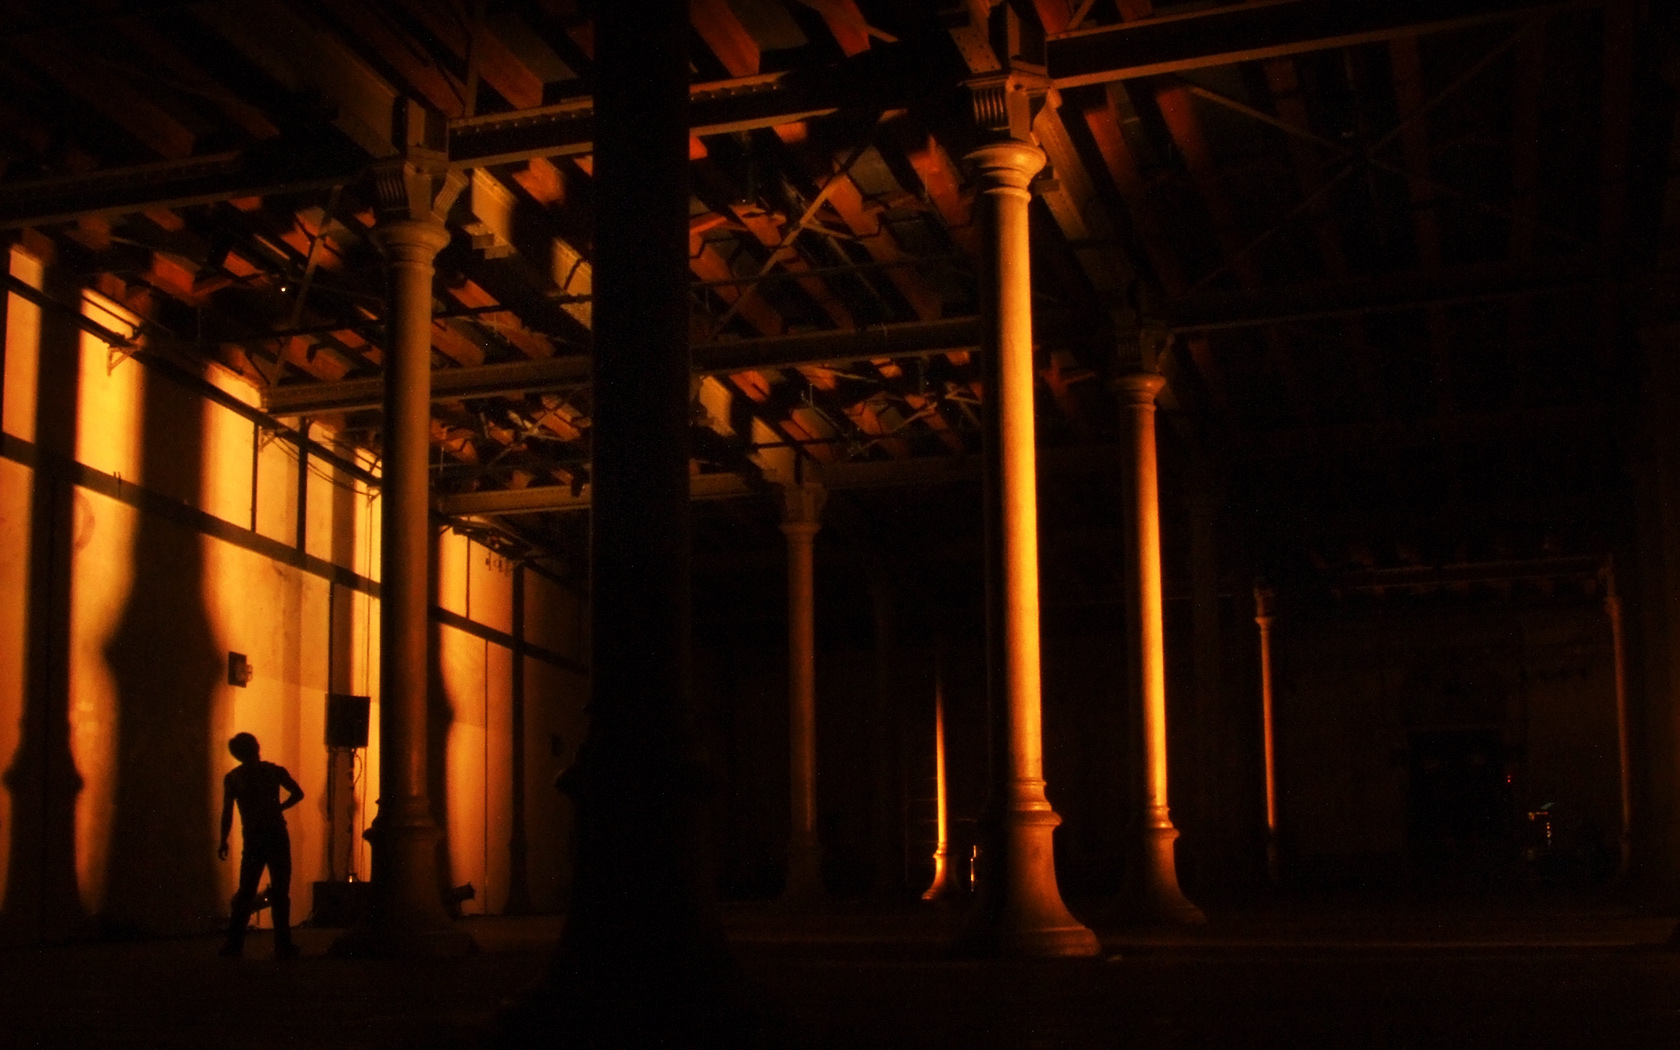 An image of light being casted on stage pillars